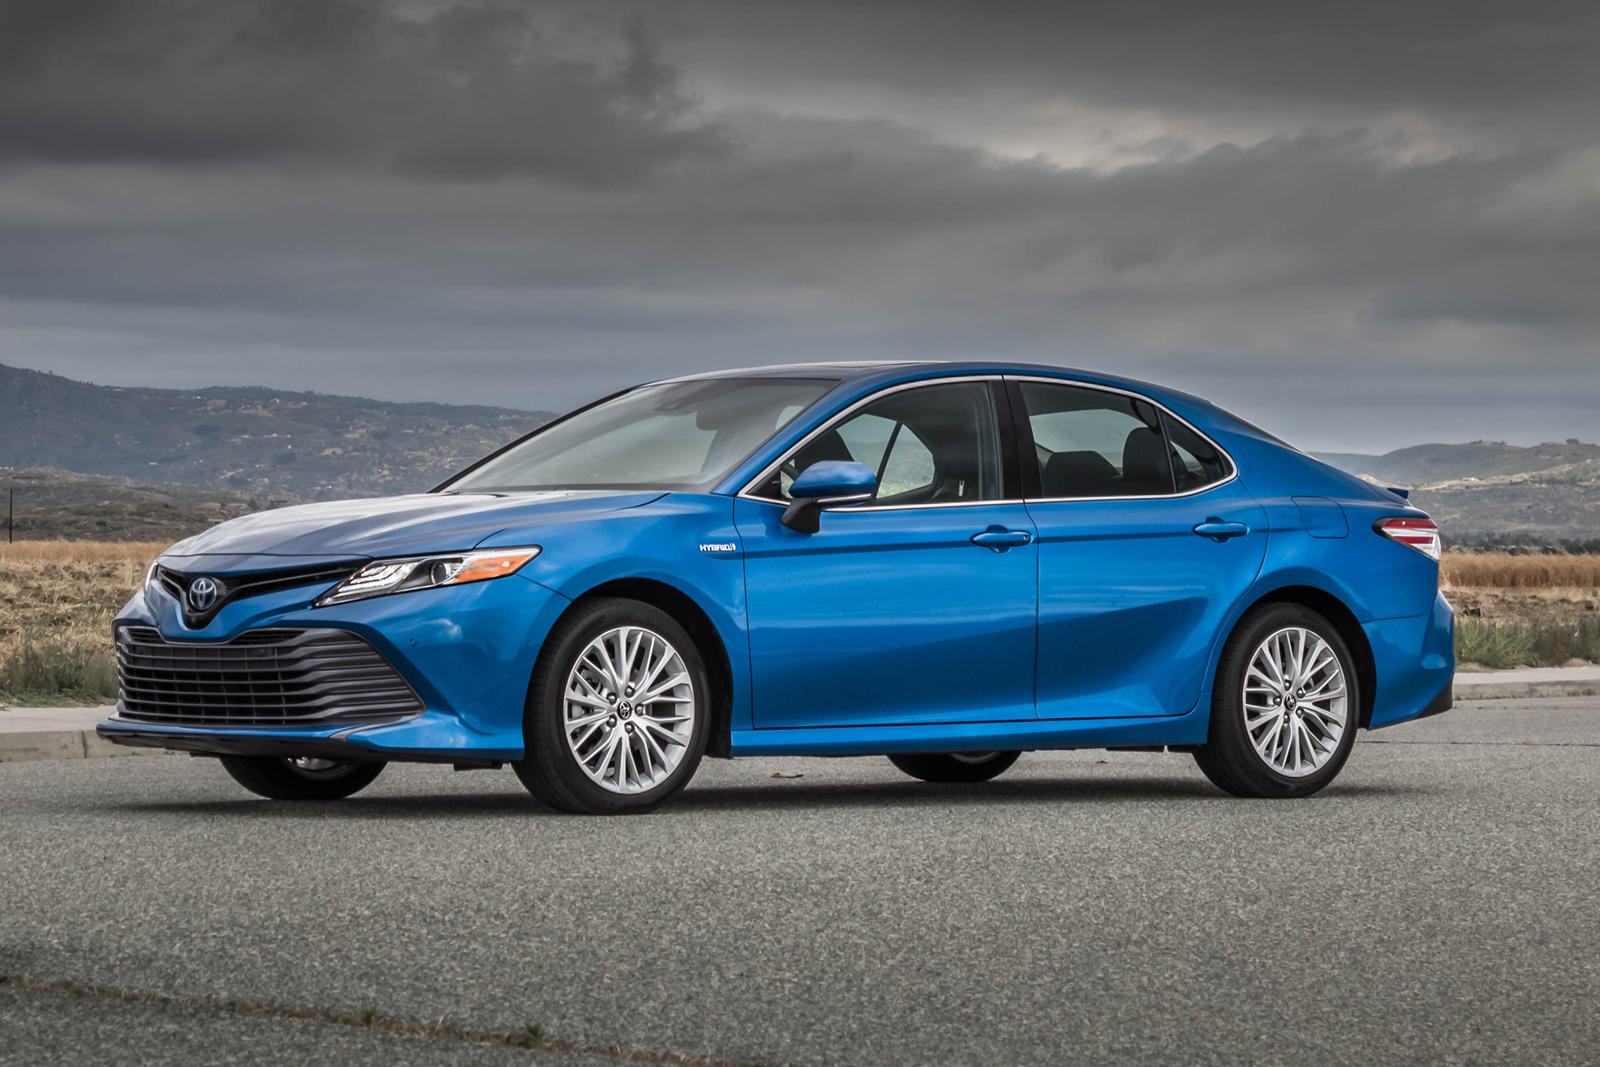 2021 Toyota Camry Hybrid Costs Less Than Last Year | CarBuzz